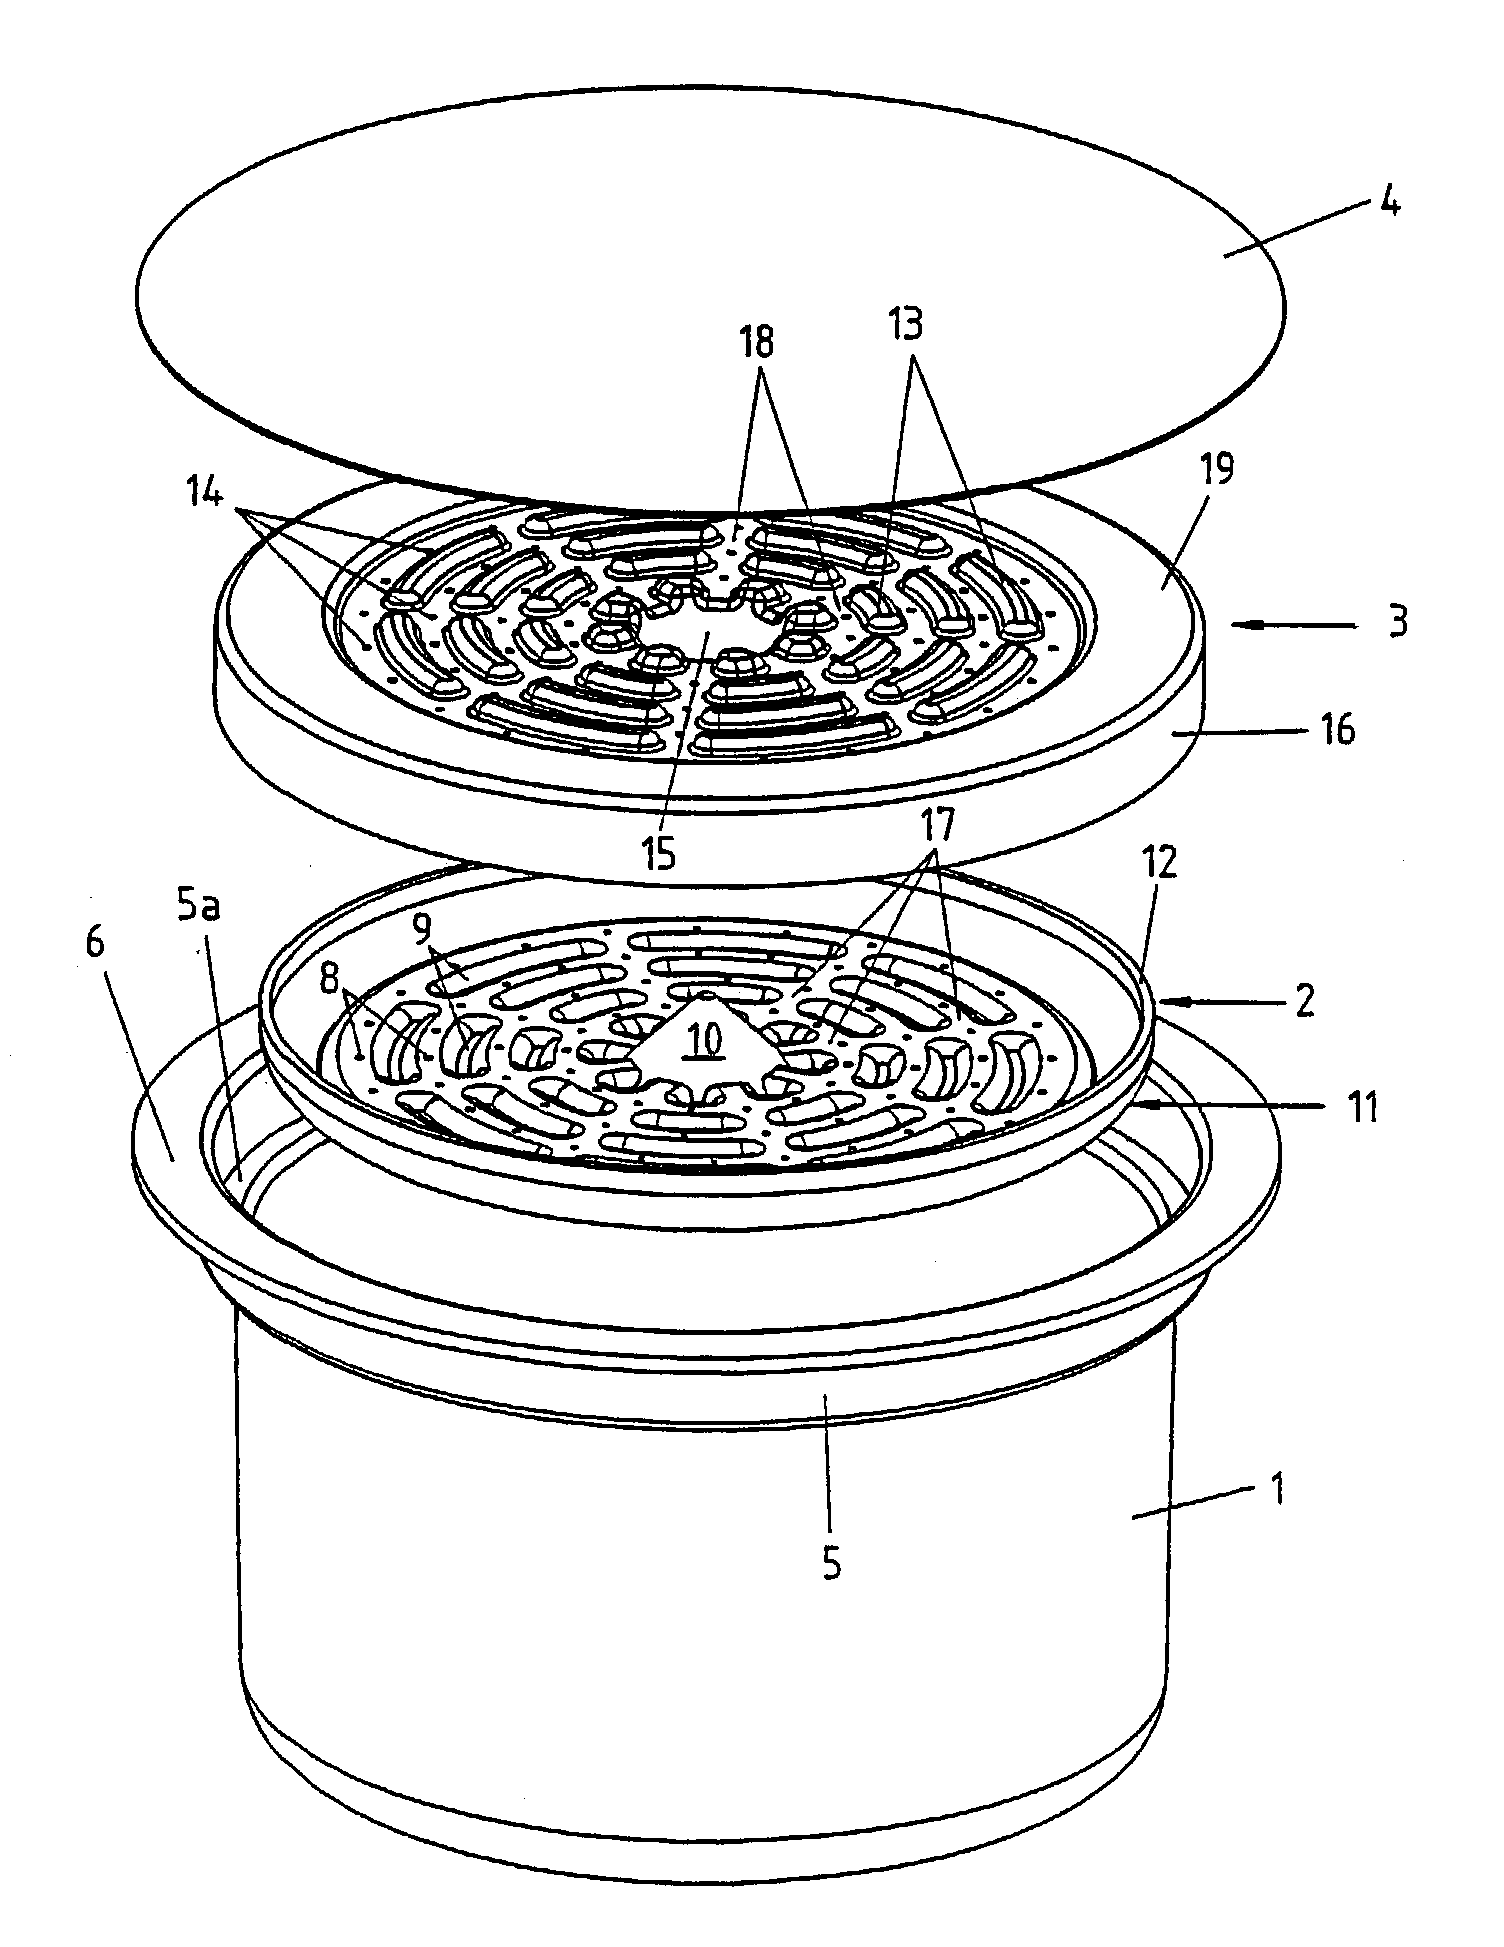 Cartridge containing a single serving of a particulate substance for preparing a beverage